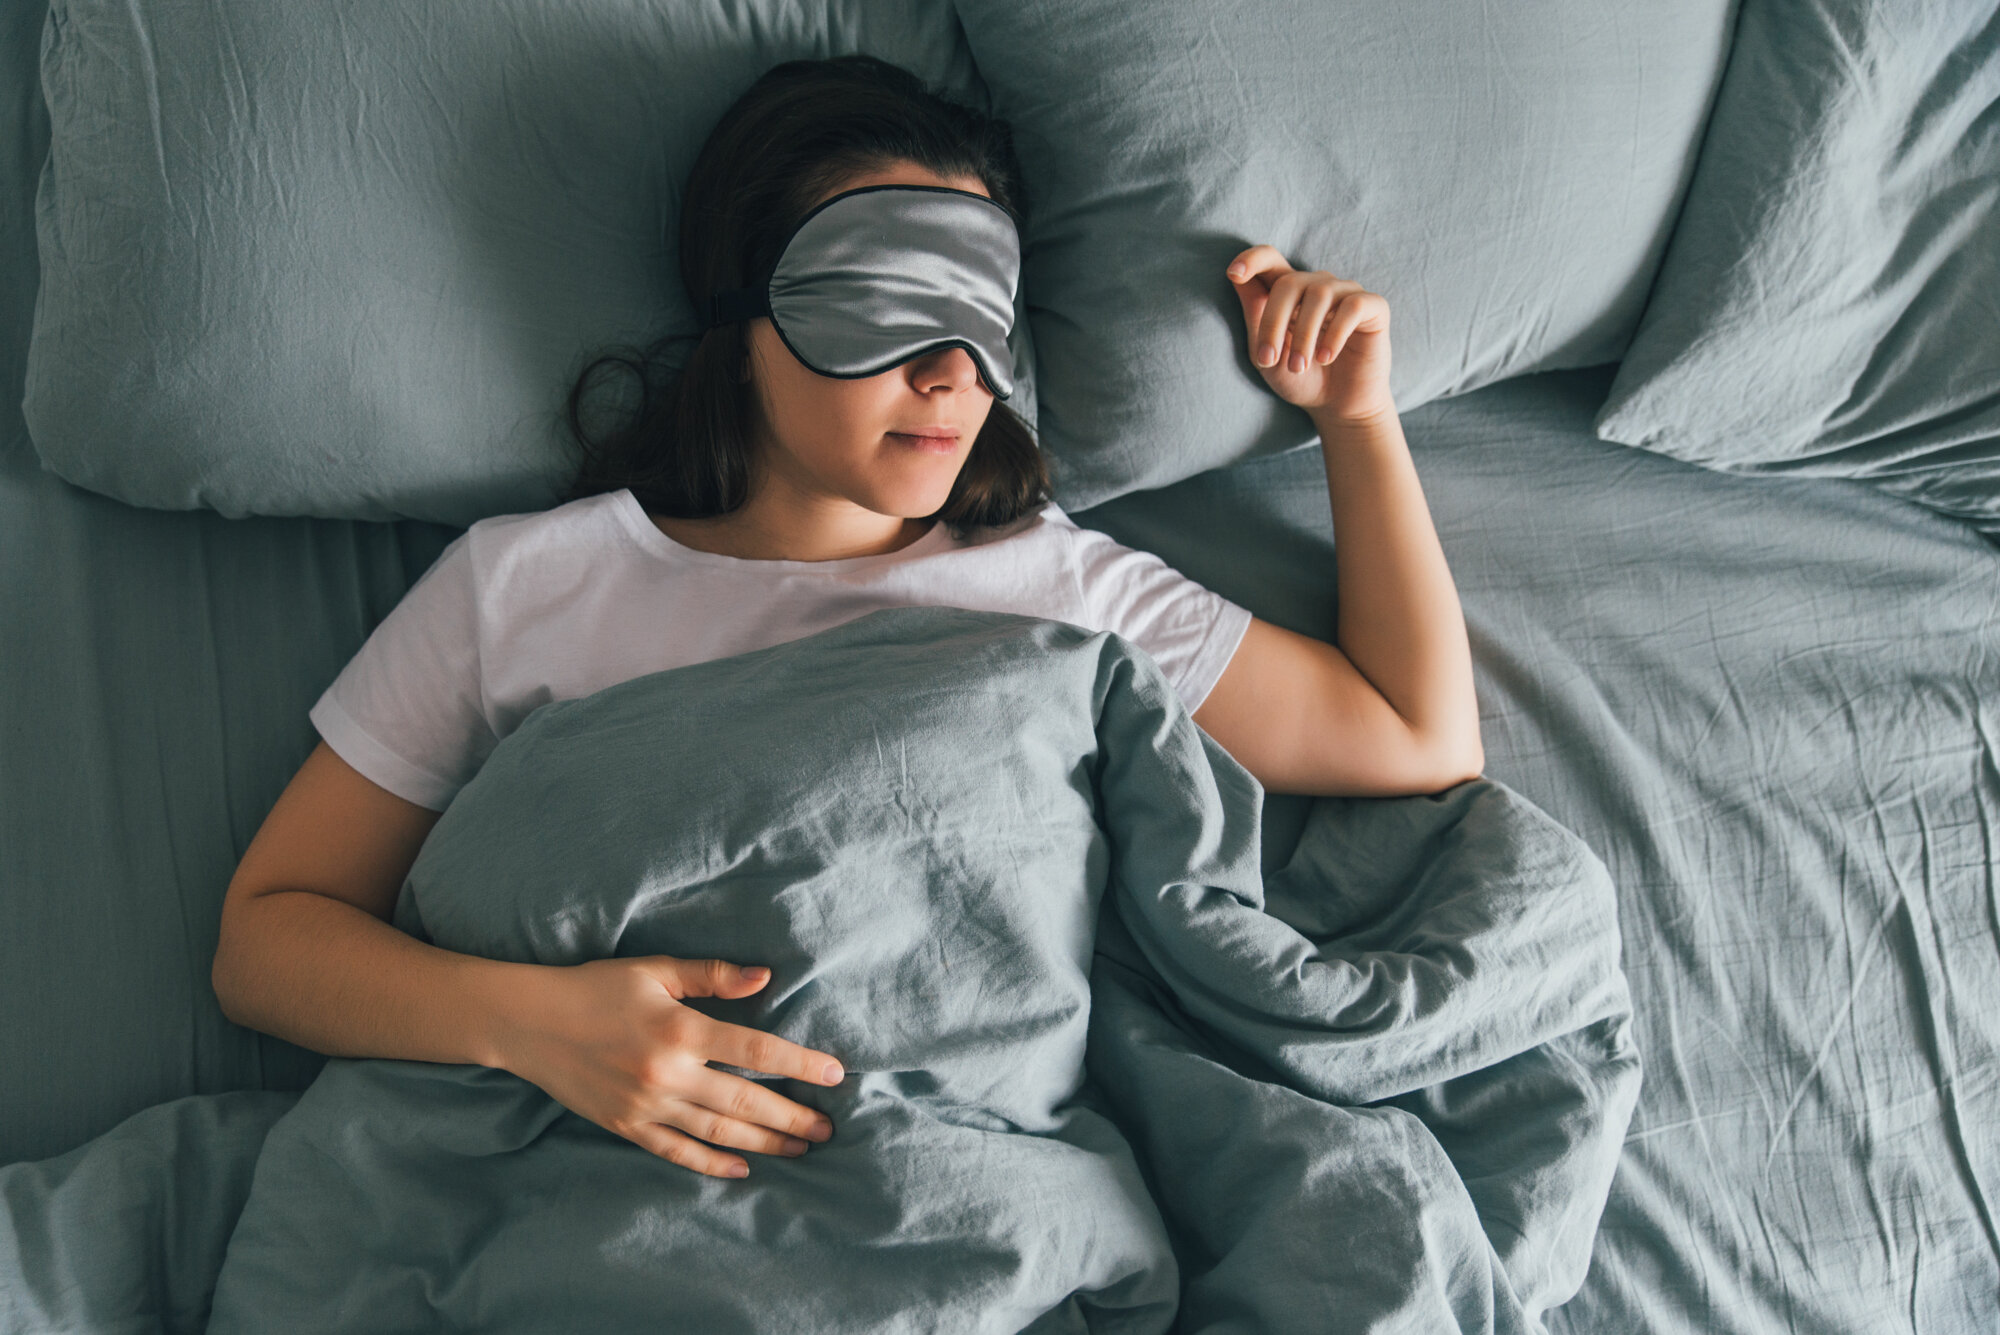 Why do you want a good night’s sleep before and after taking the COVID-19 vaccine